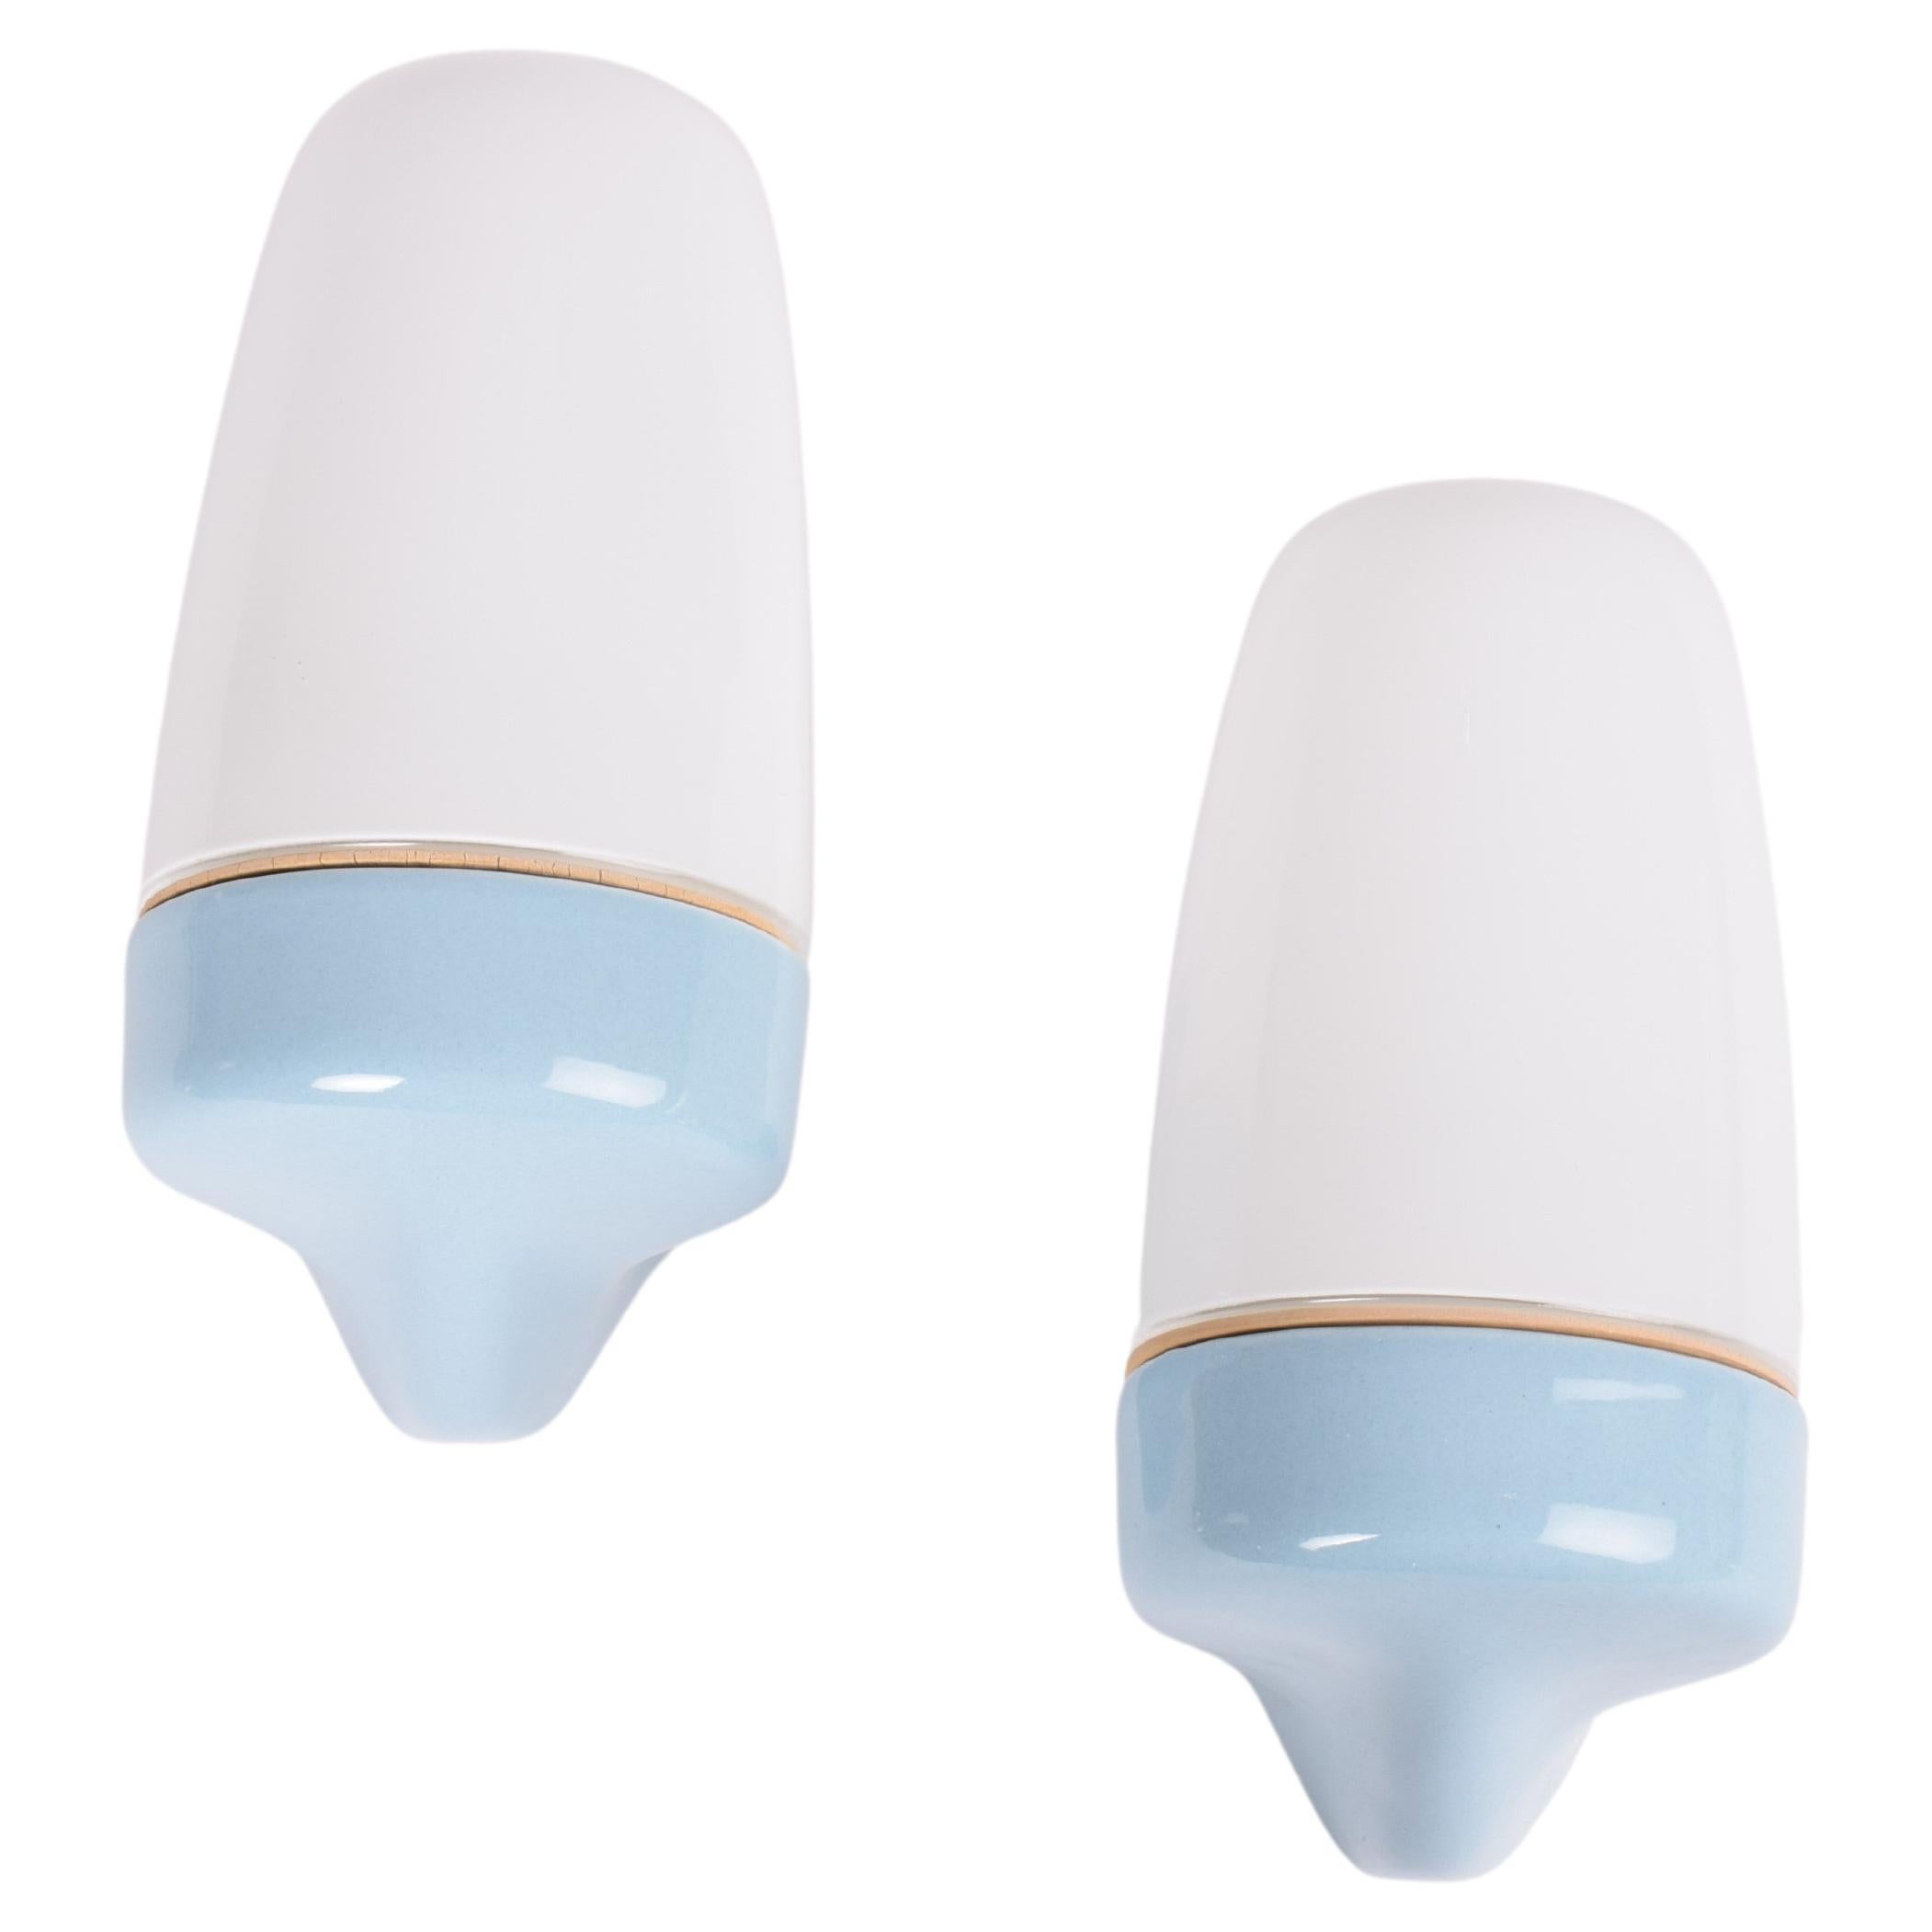 Set of two original vintage wall sconces by German designer Wilhelm Wagenfeld. They were manufactured by Lindner Wandleuchten ca 1950s.

This set has baby blue glazed ceramic holders with white opaline glass bulb covers.
Both the model and the